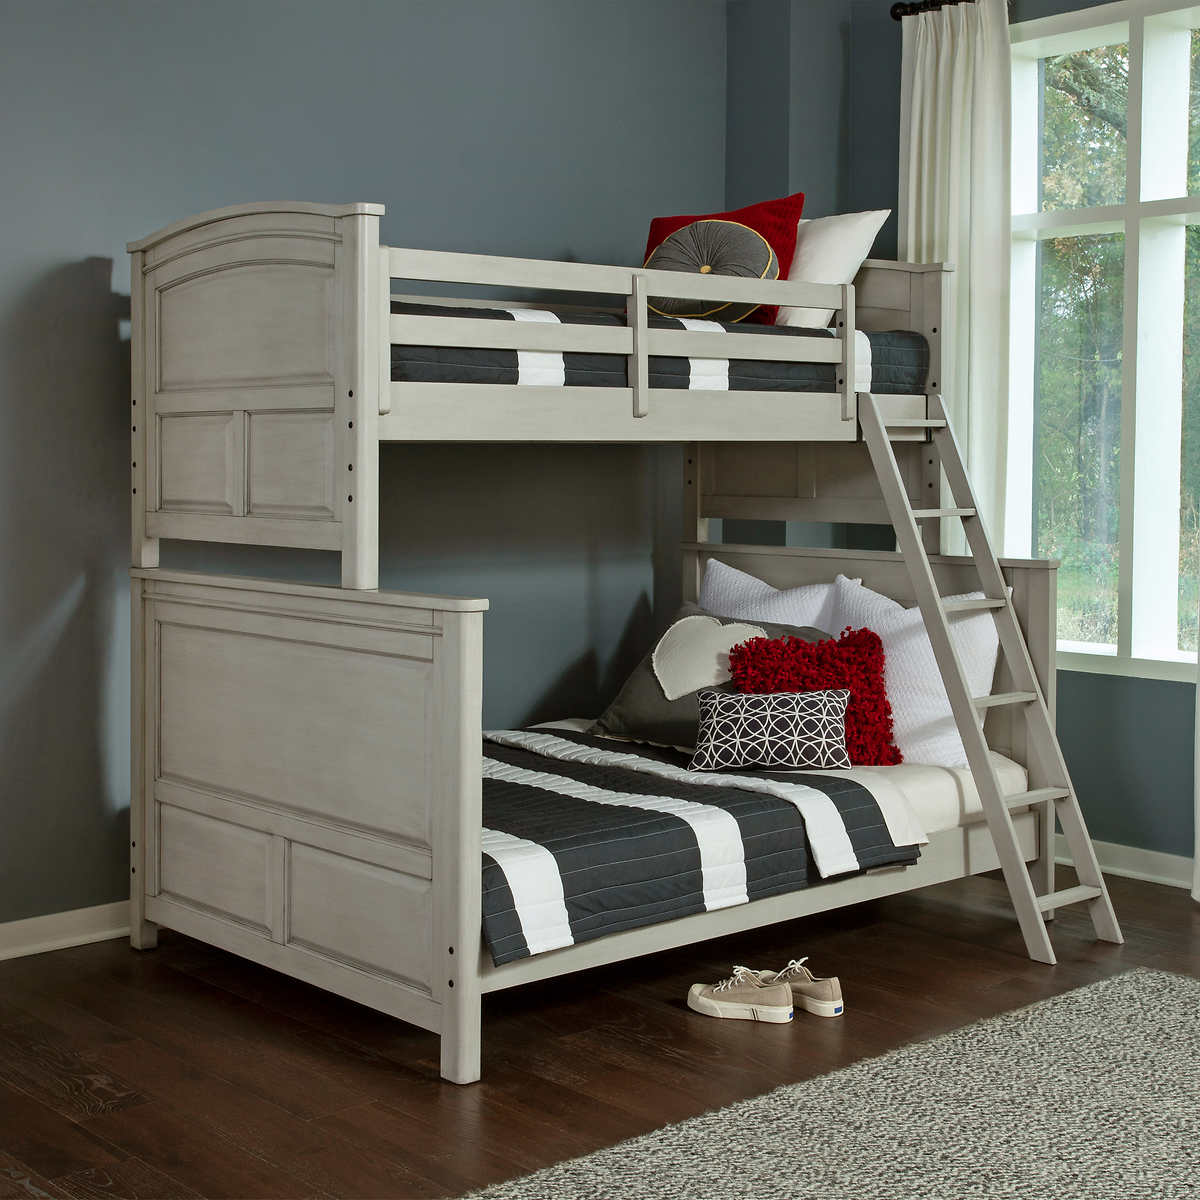 Wingate Twin Over Full Bunk Bed Costco, Bunk Beds Same Day Delivery